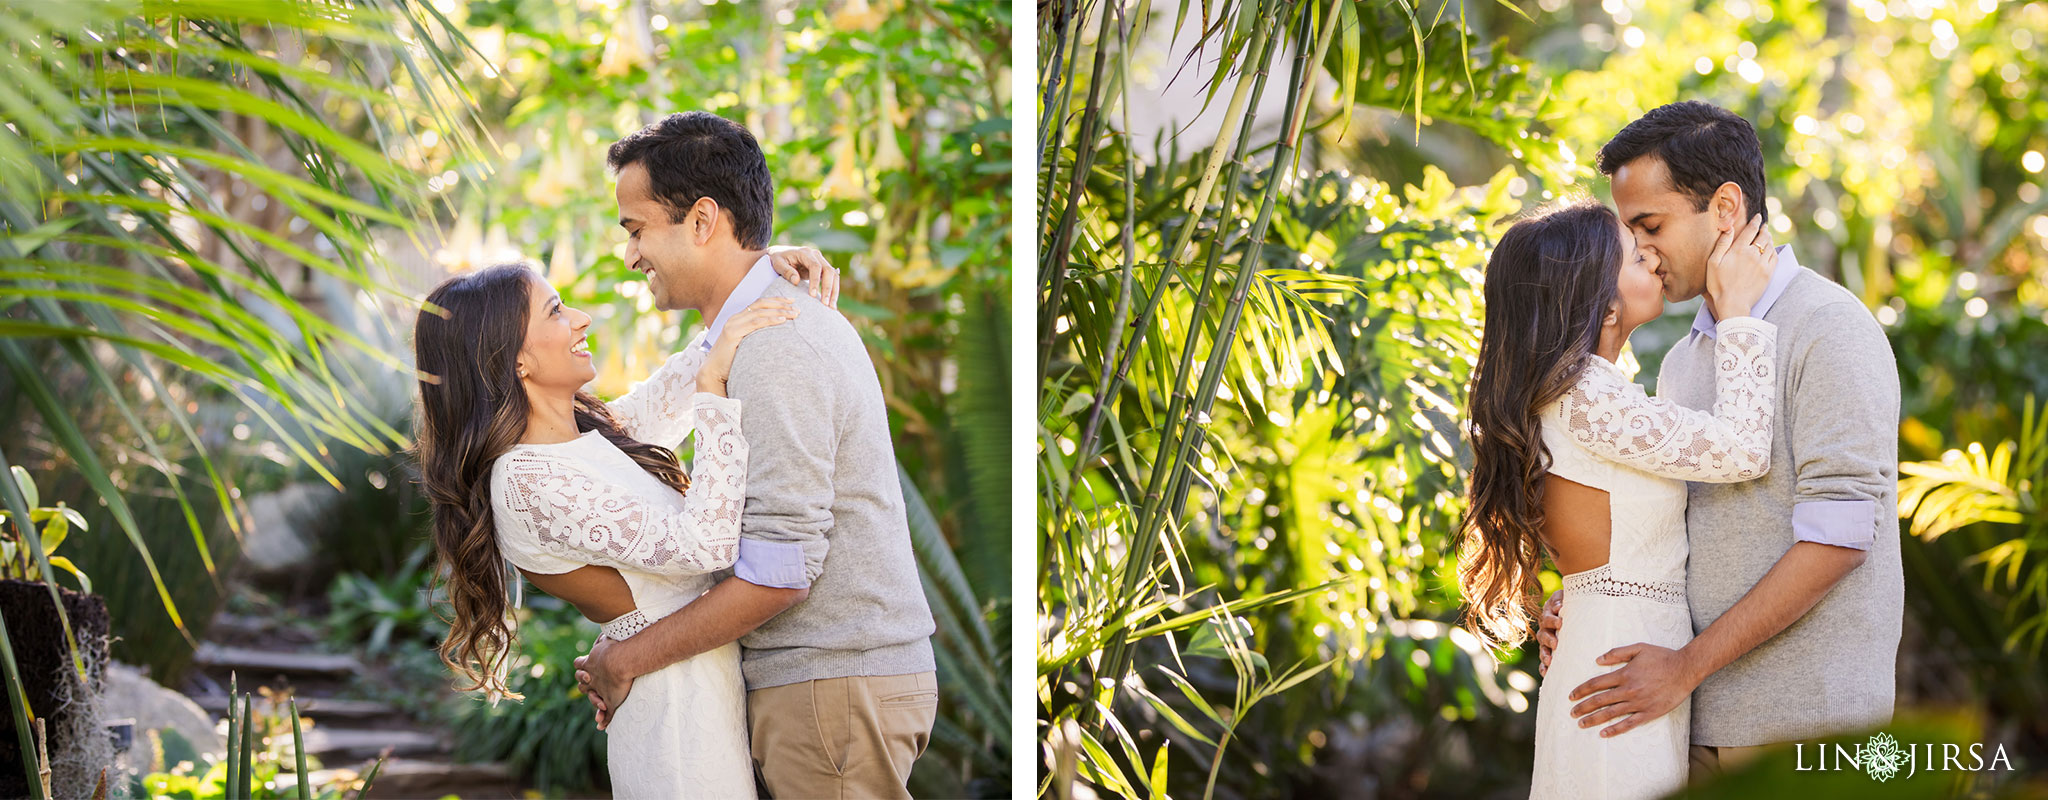 02 Newport Beach Vineyards and Winery Engagement Photography